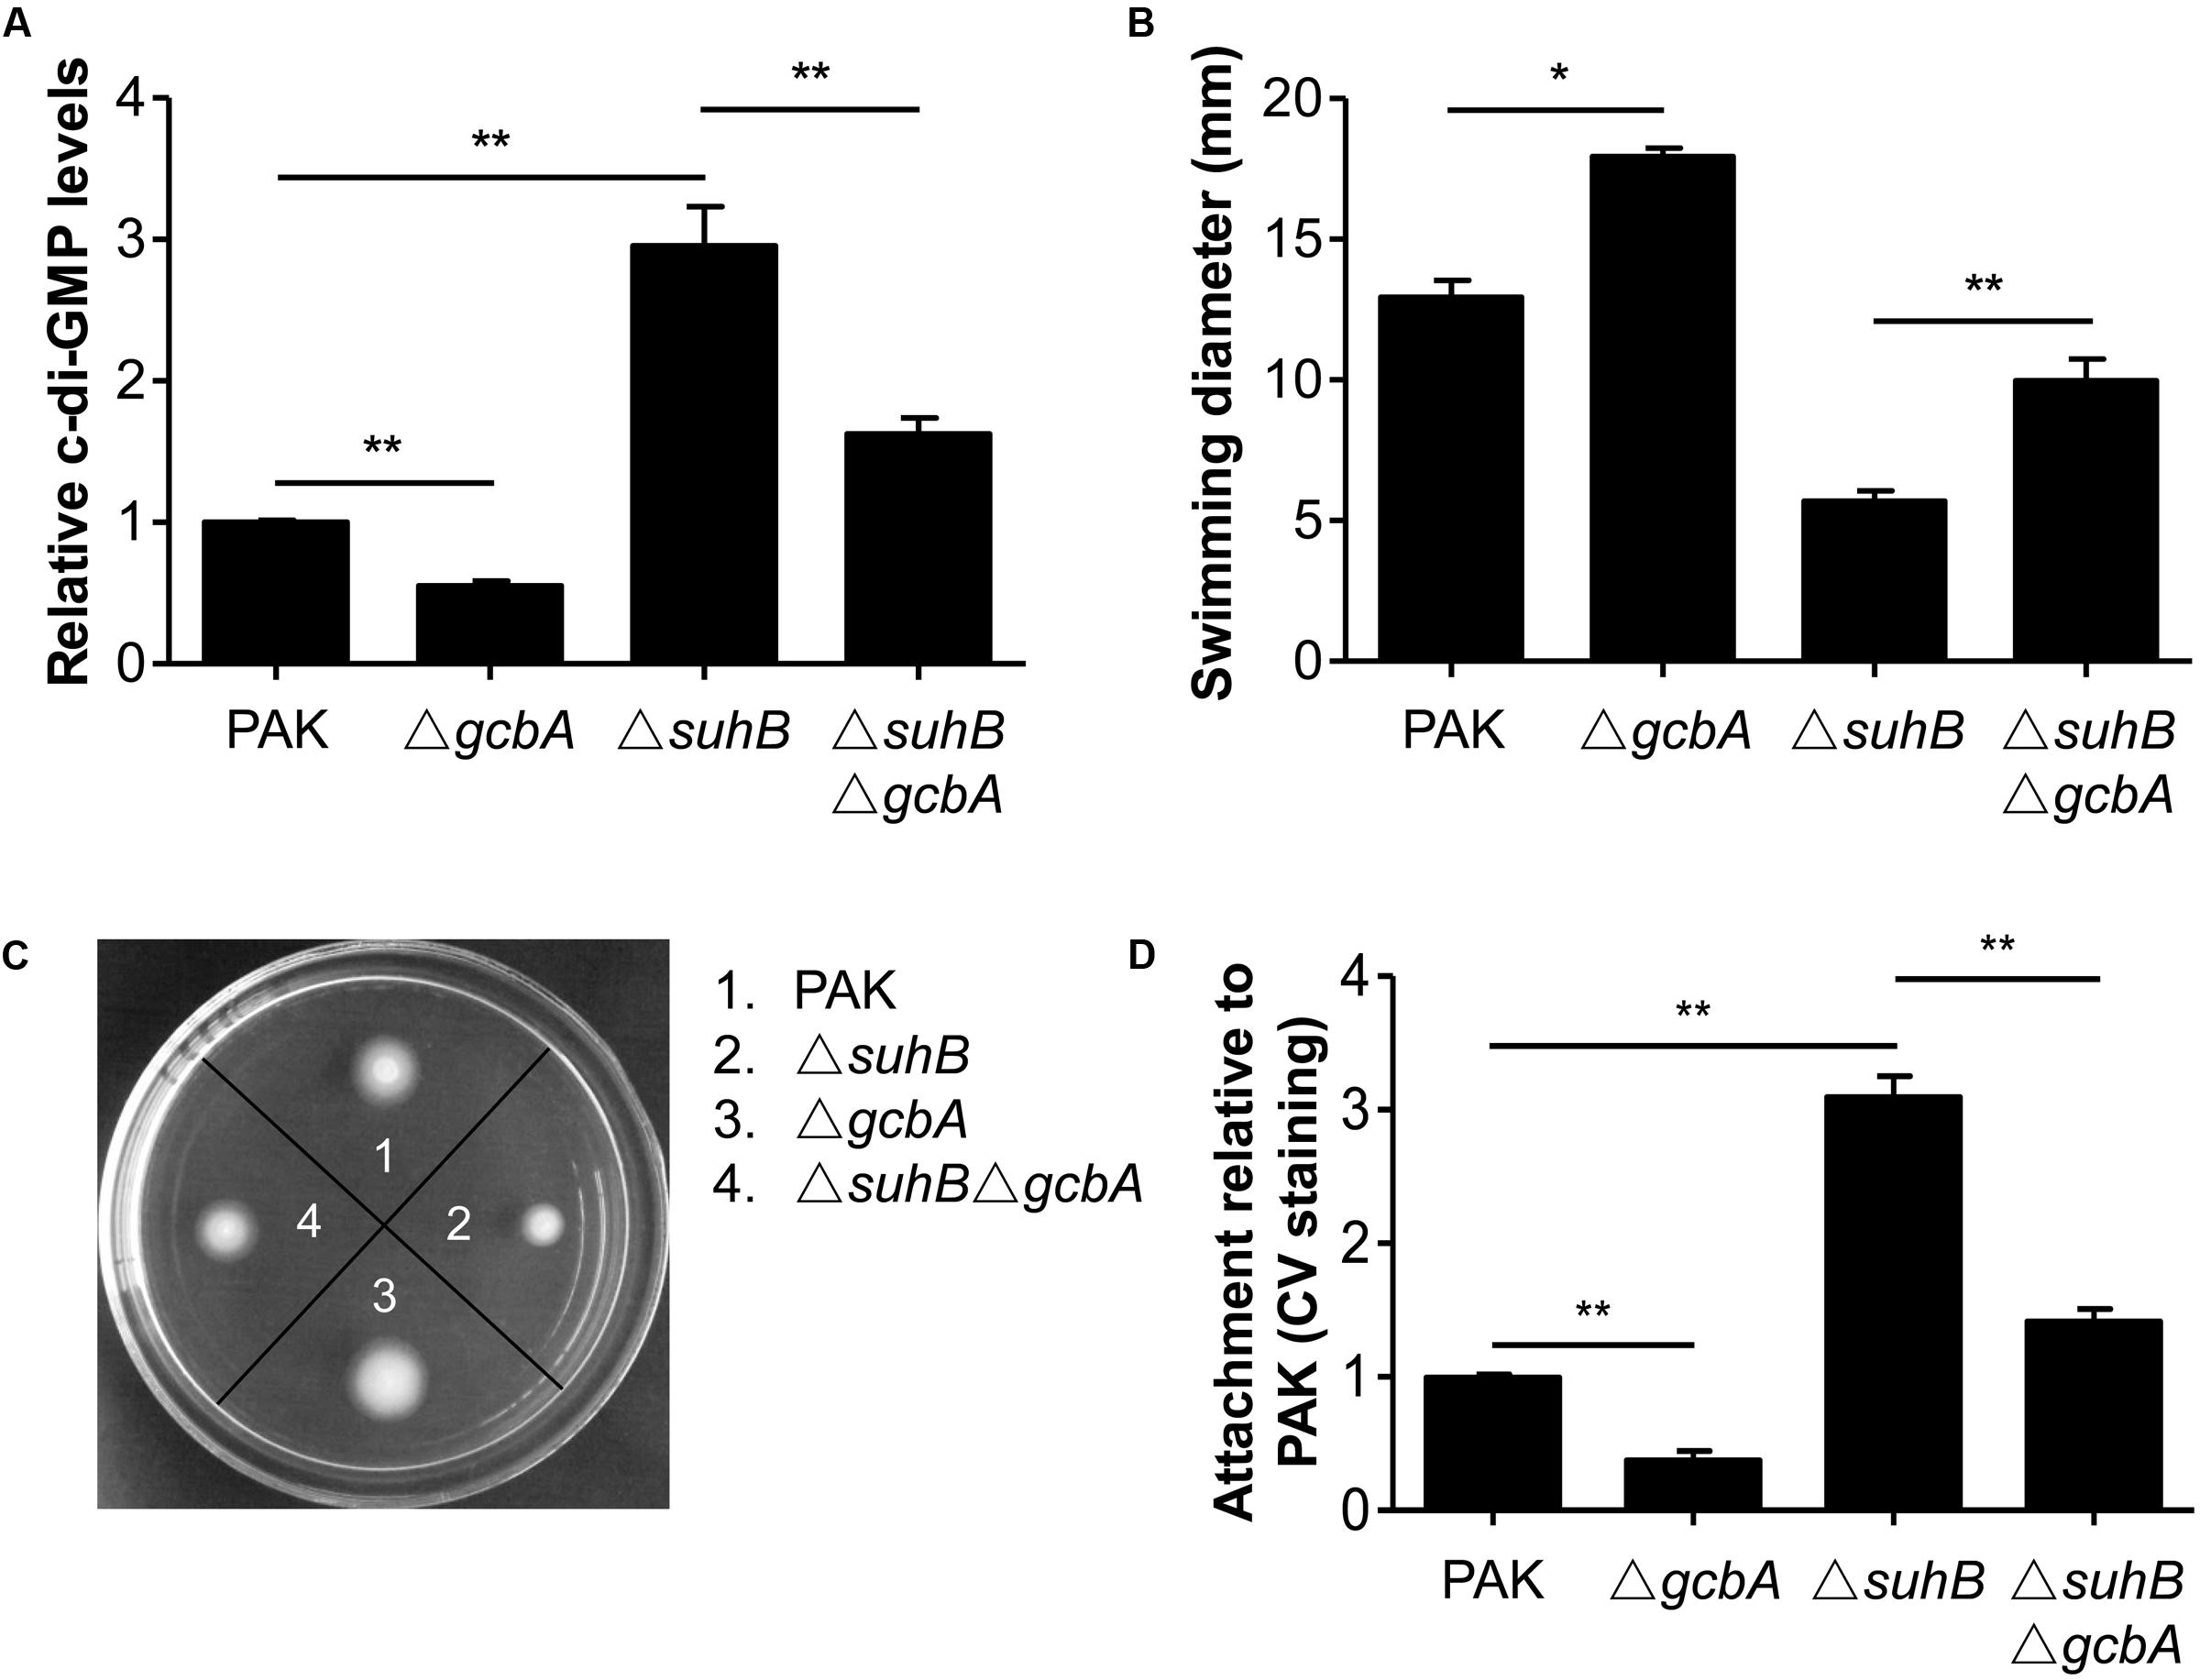 Frontiers Suhb Regulates The Motile Sessile Switch In Pseudomonas Aeruginosa Through The Gac Rsm Pathway And C Di Gmp Signaling Microbiology